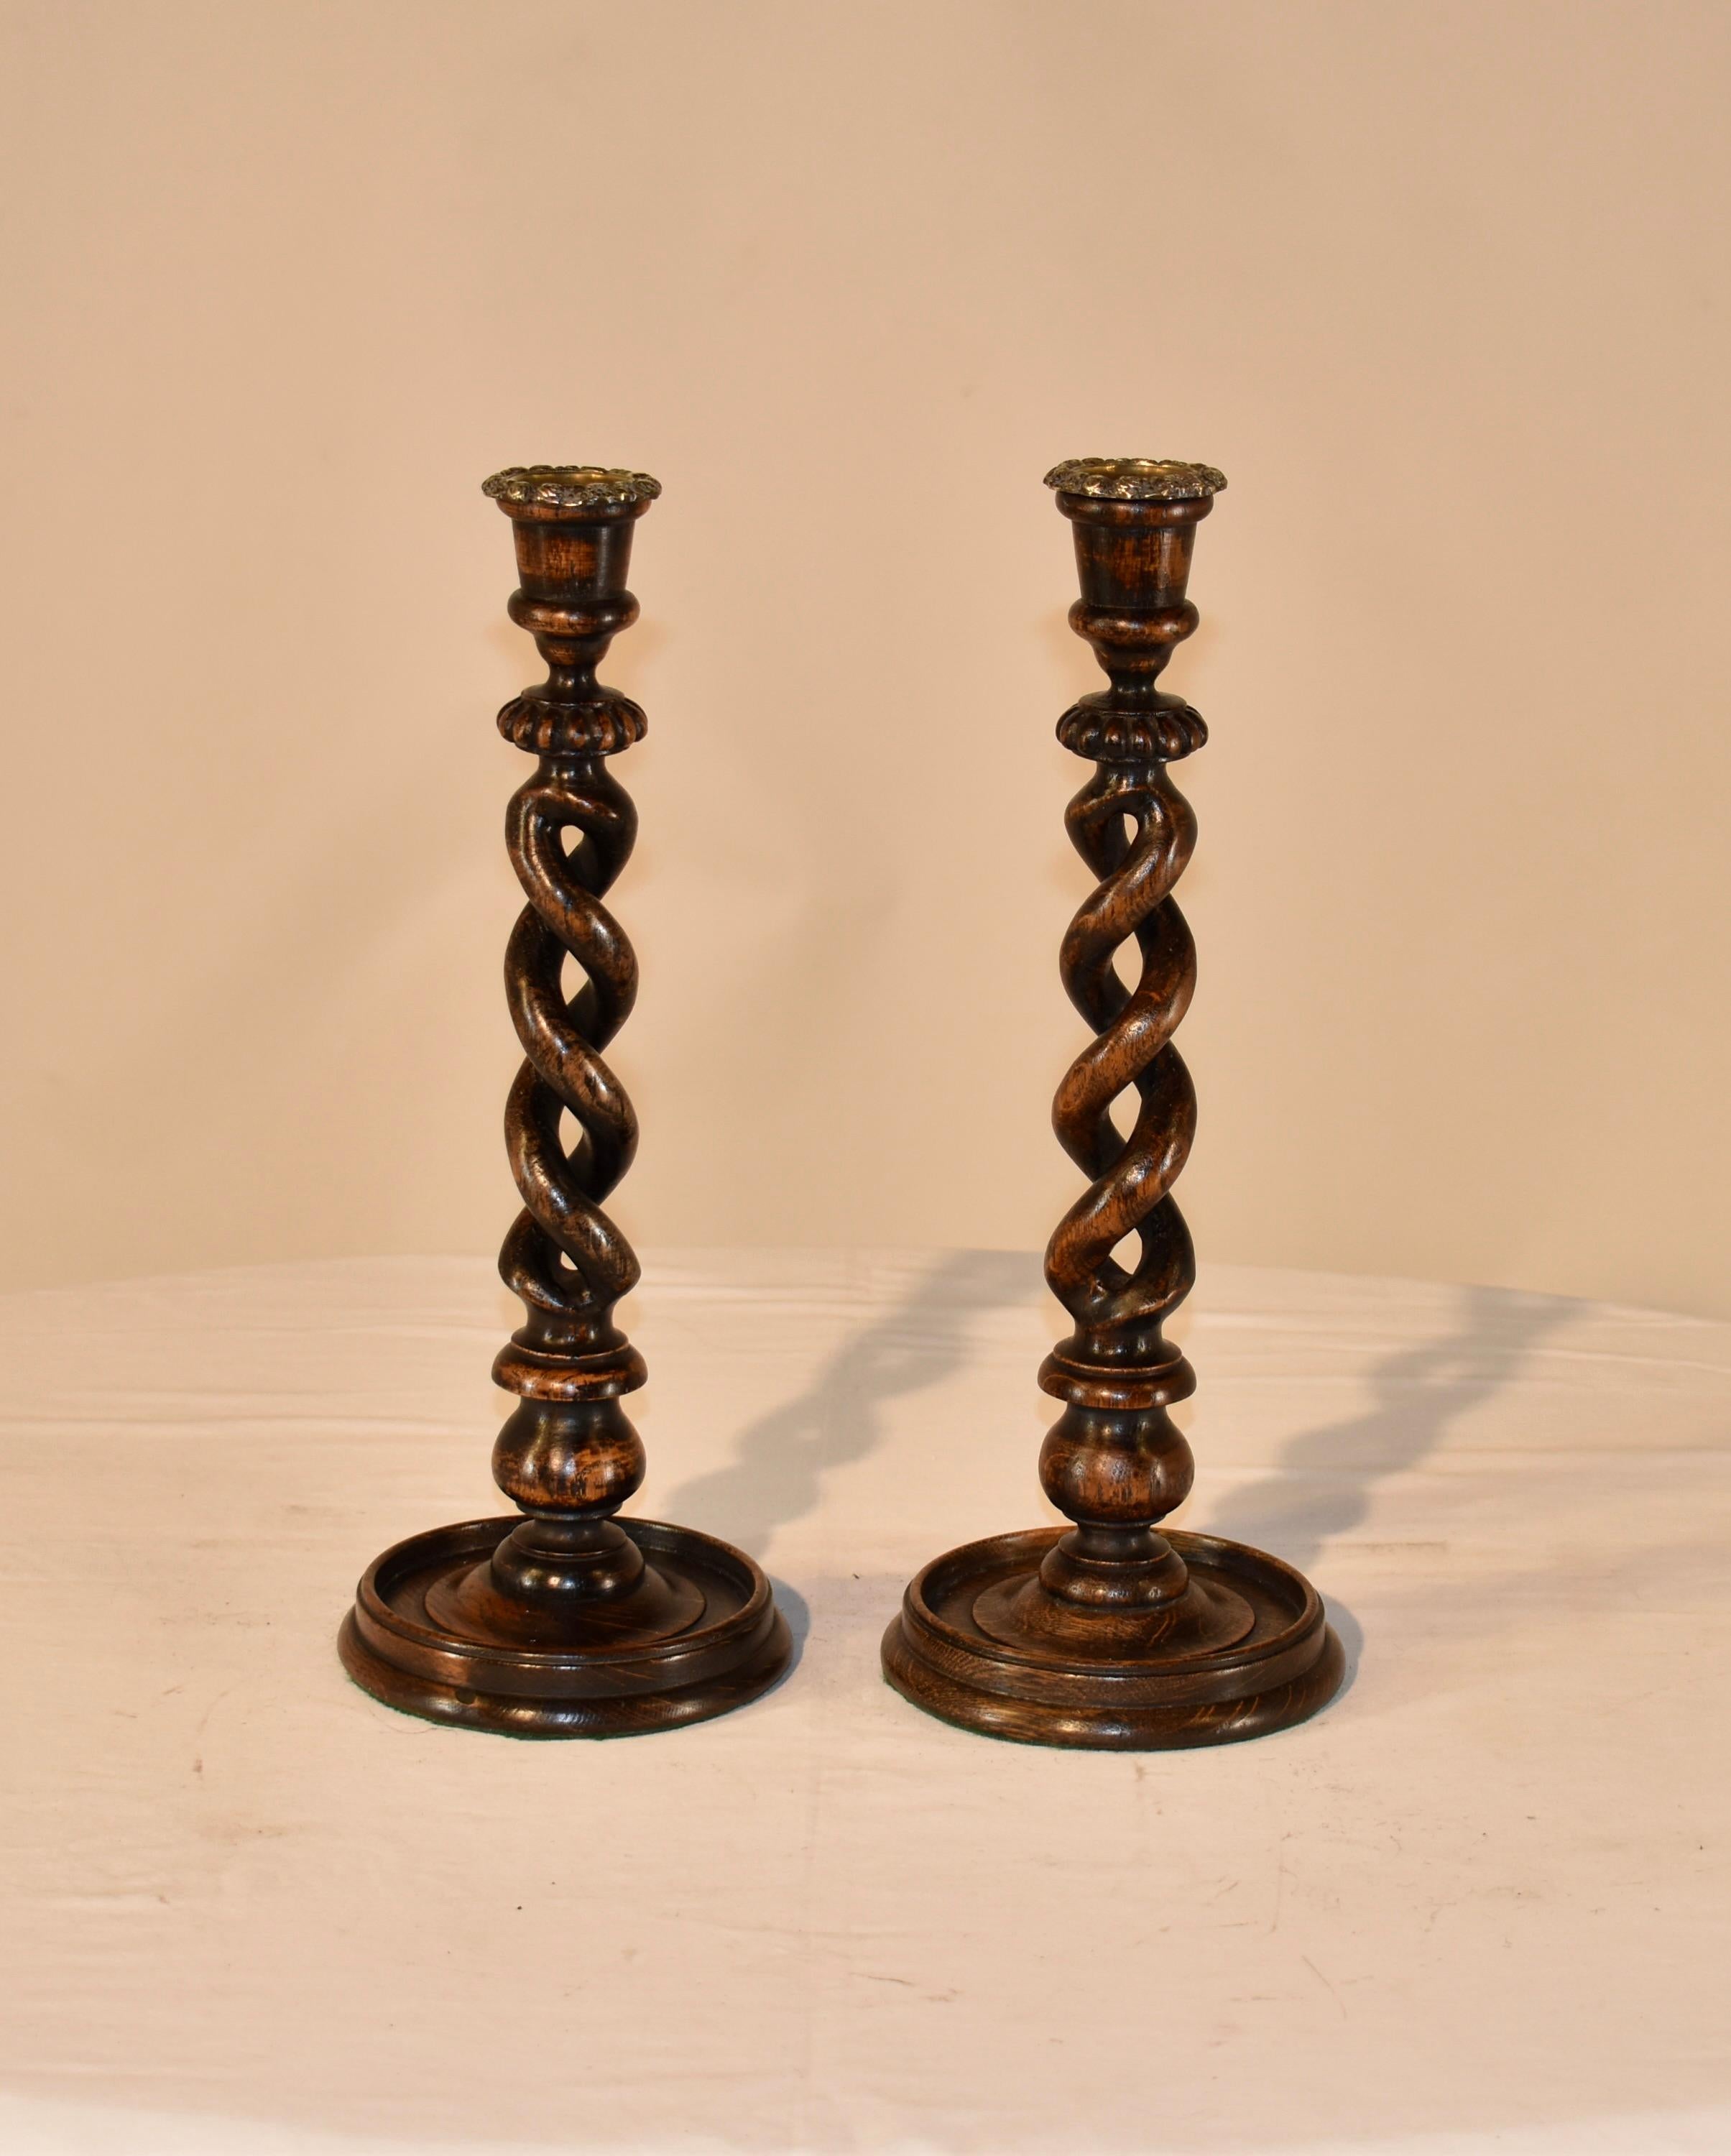 Pair of 19th century oak candlesticks from England with open barley twist stems. This pair of candlesticks has hand cast brass bobeches over hand turned candle cups, supported on wonderfully hand turned open barley twist stems with hand carvings at